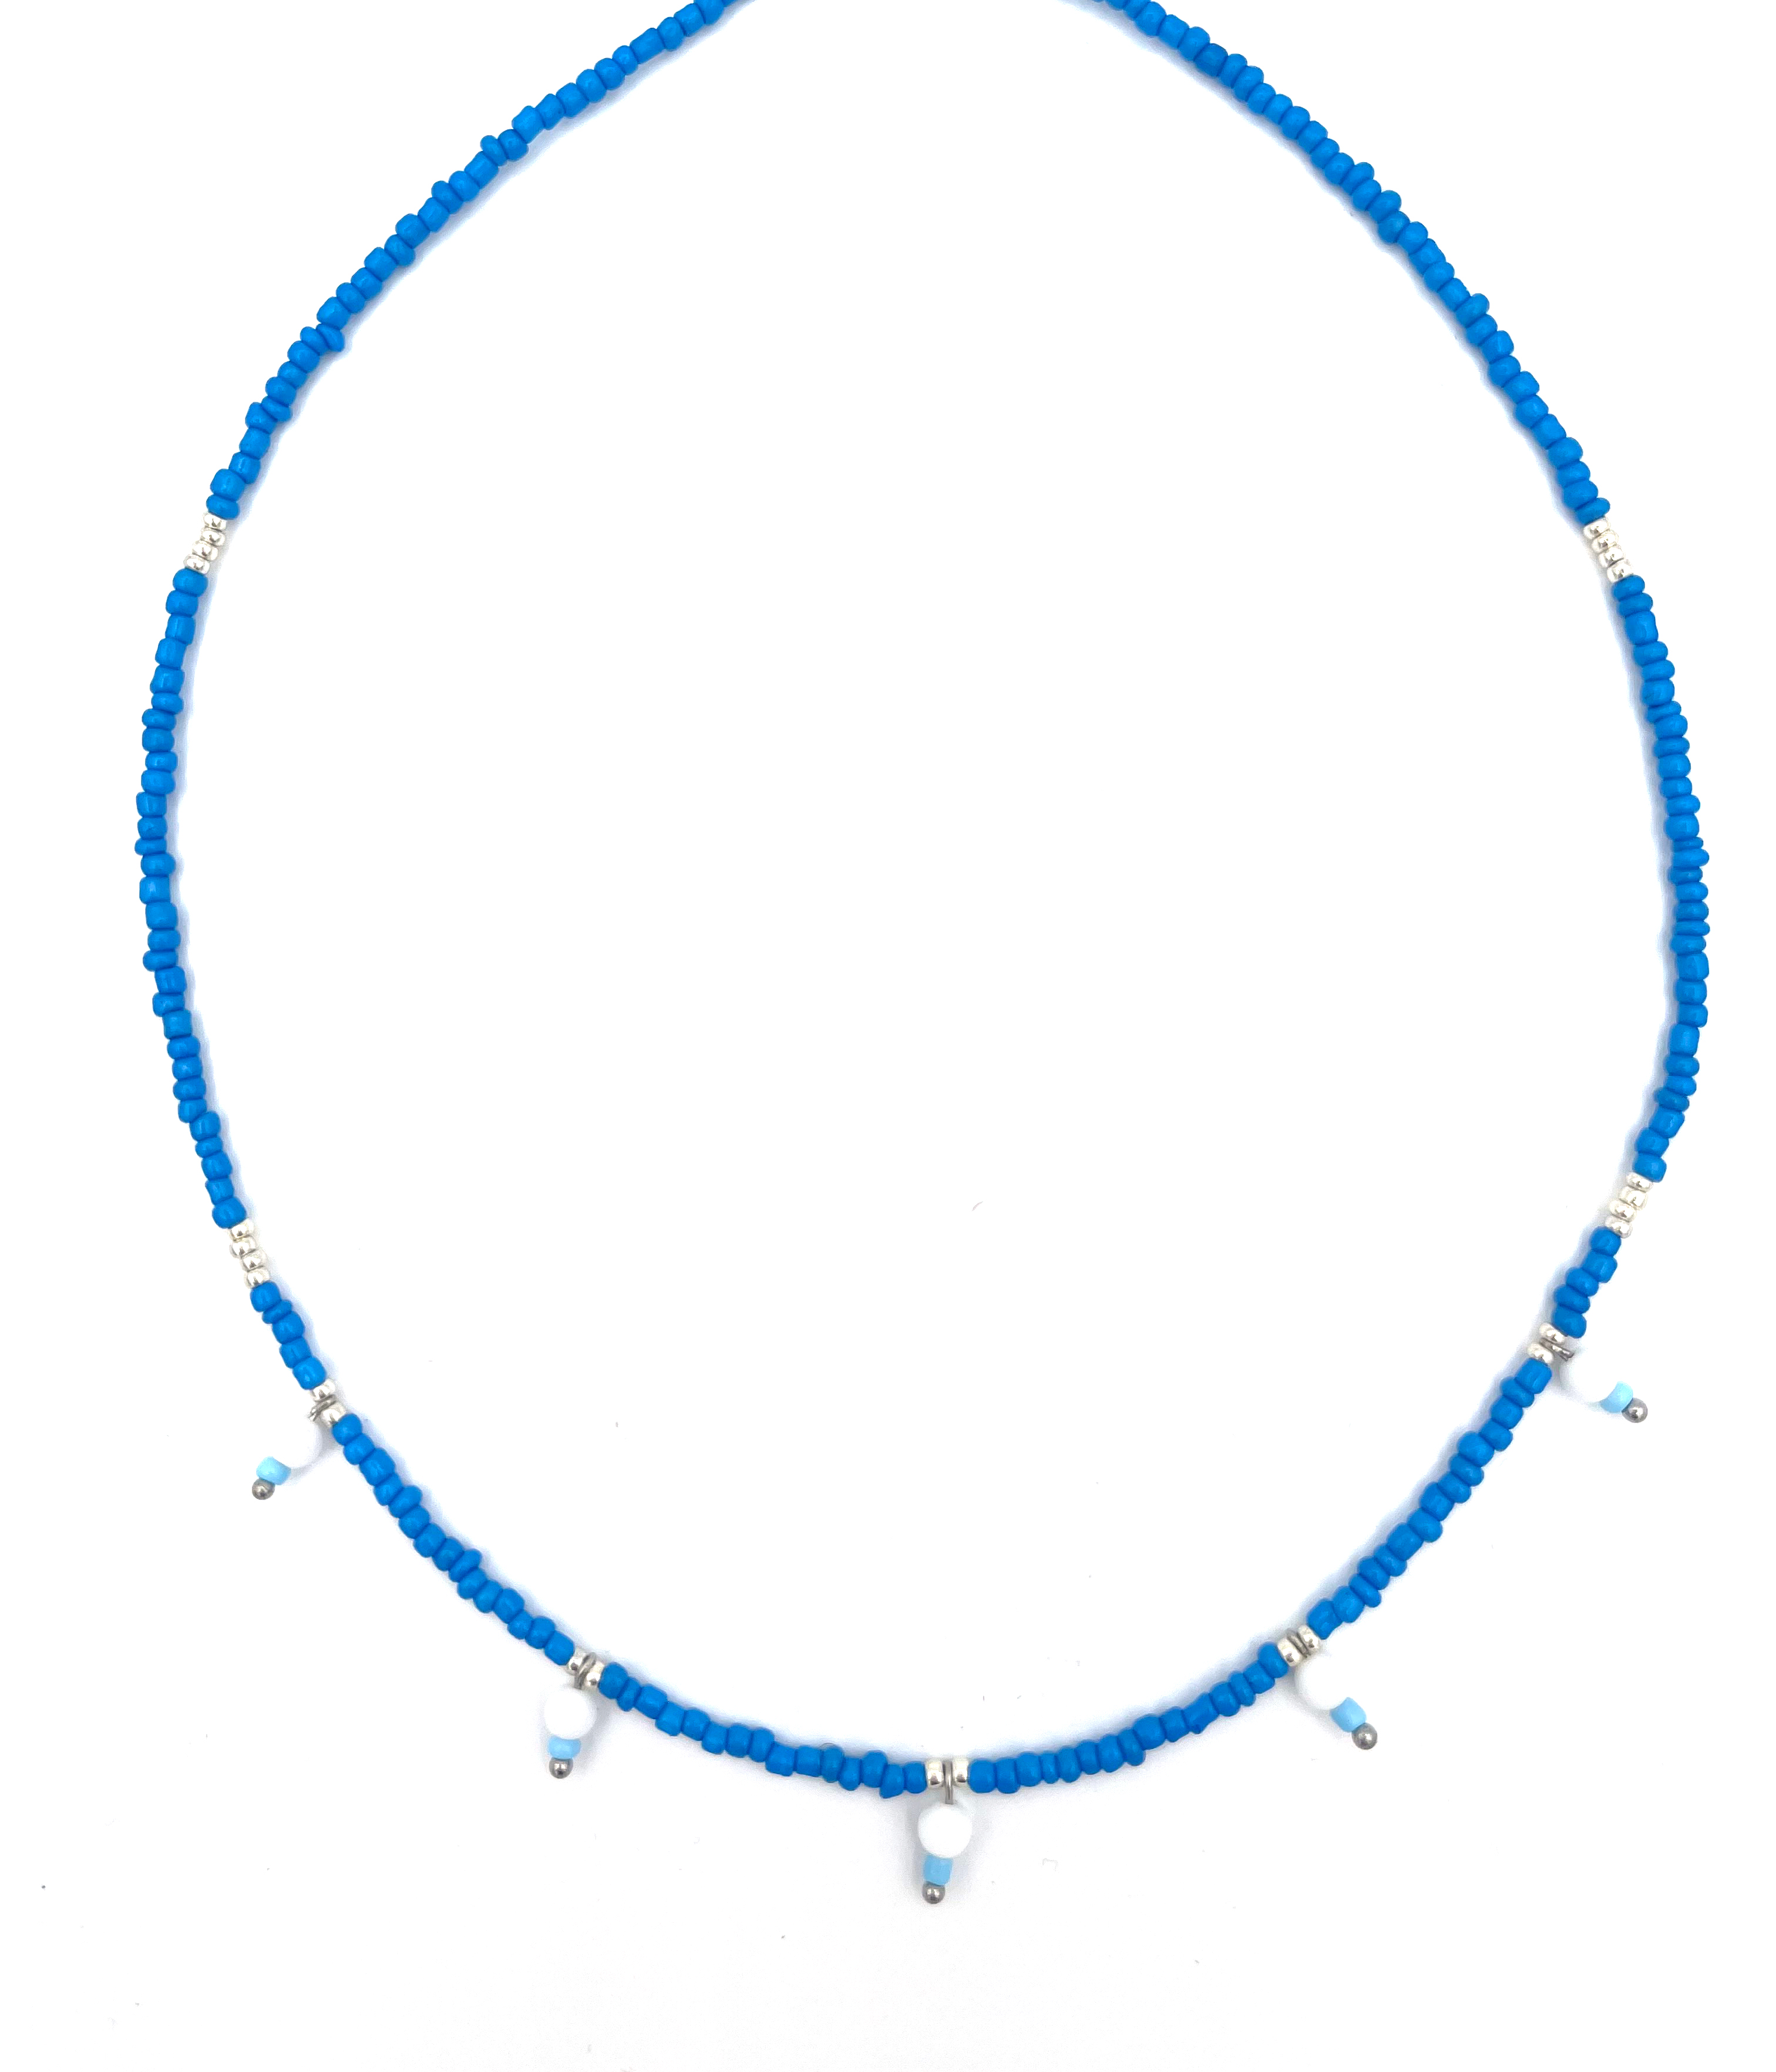 Blue 5 beads necklace